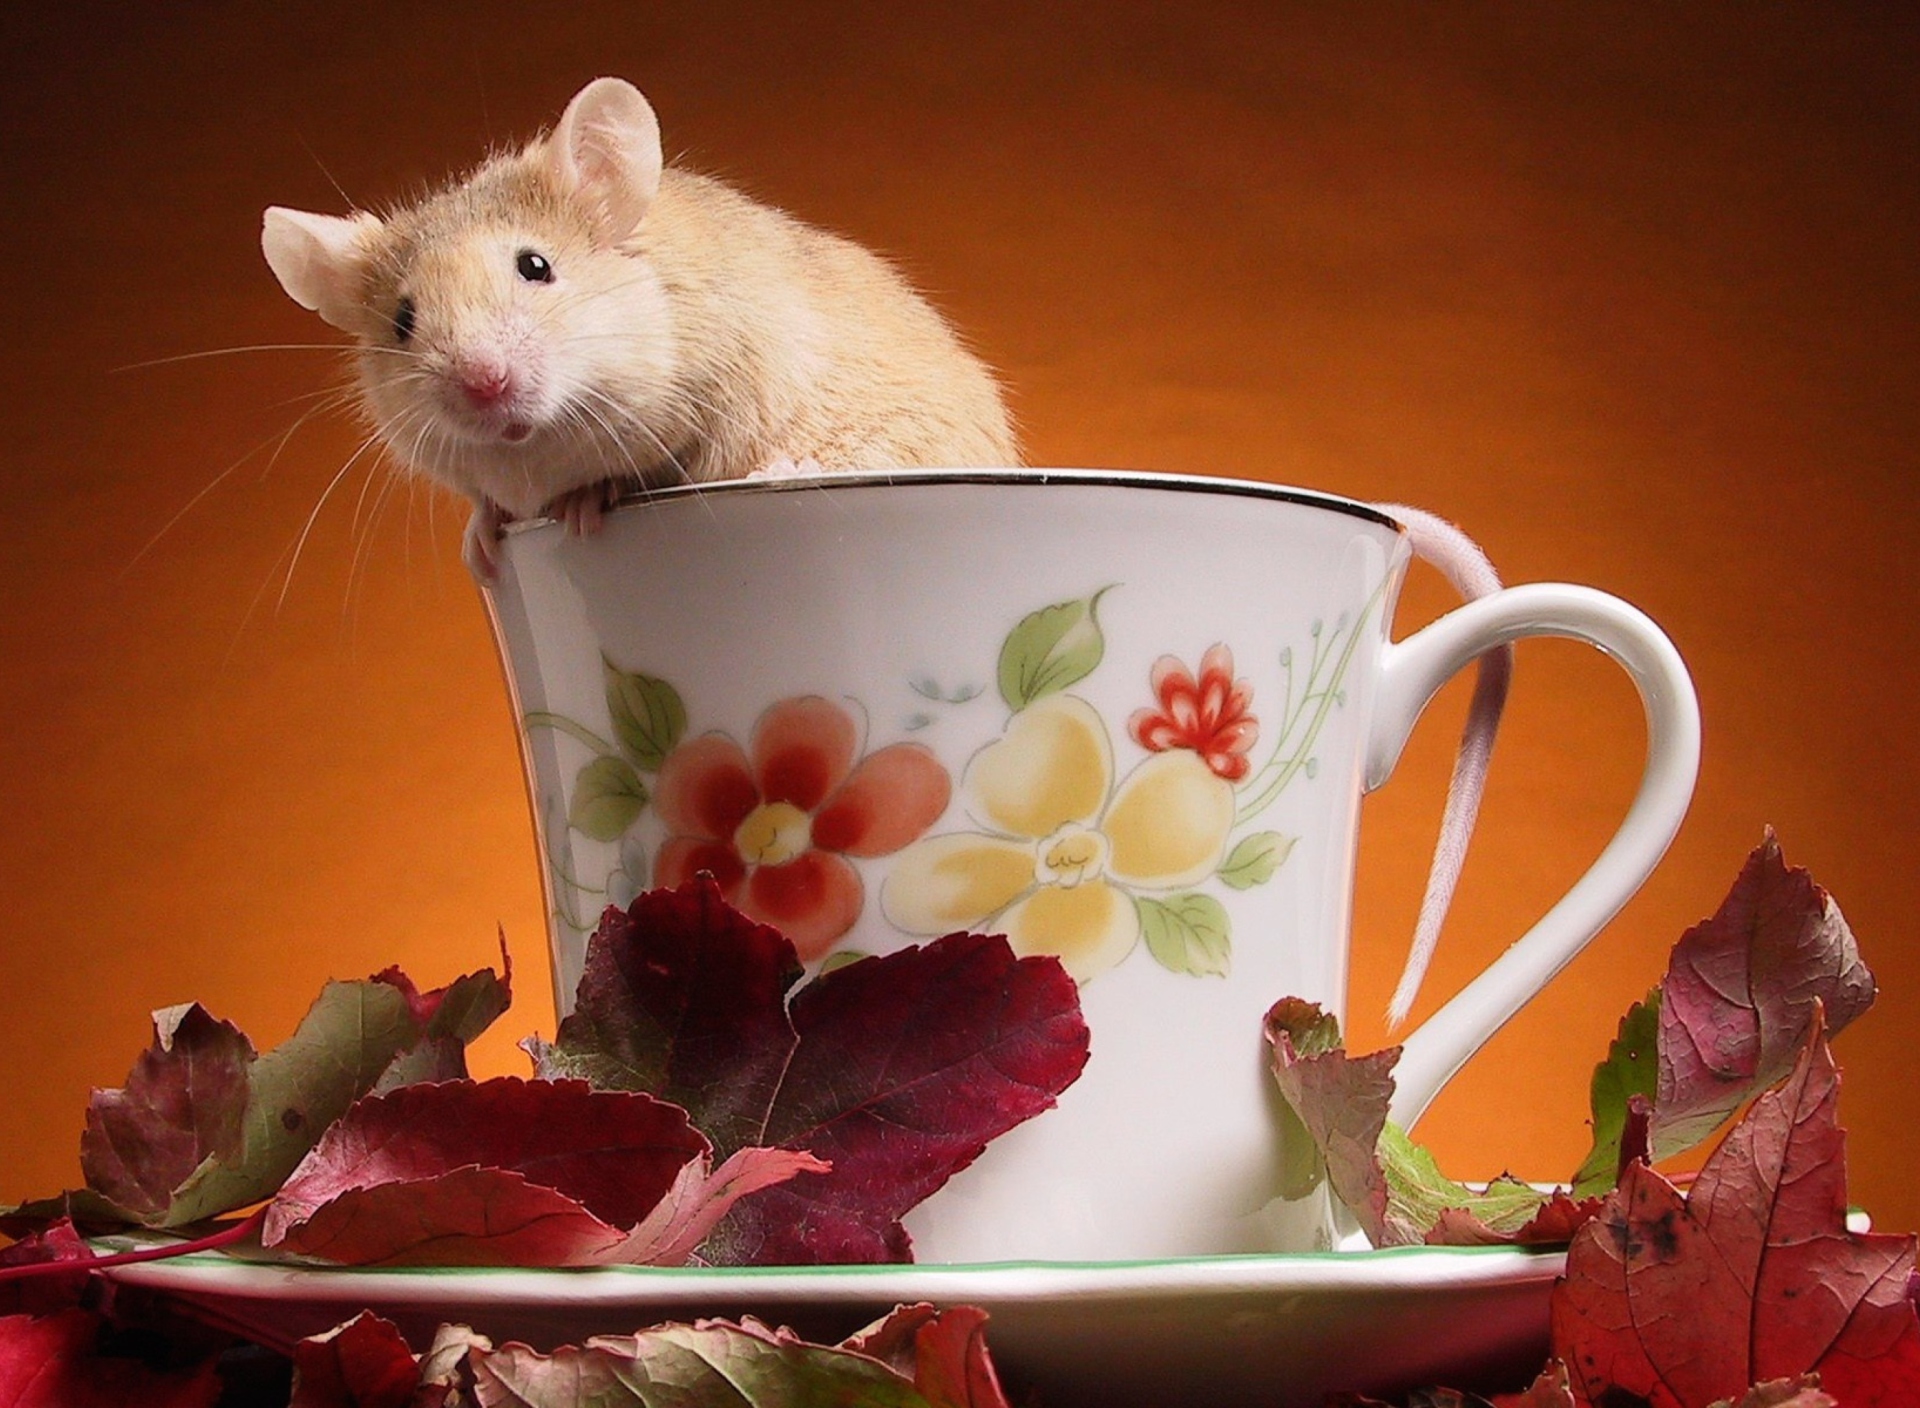 Обои Mouse In Teapot 1920x1408